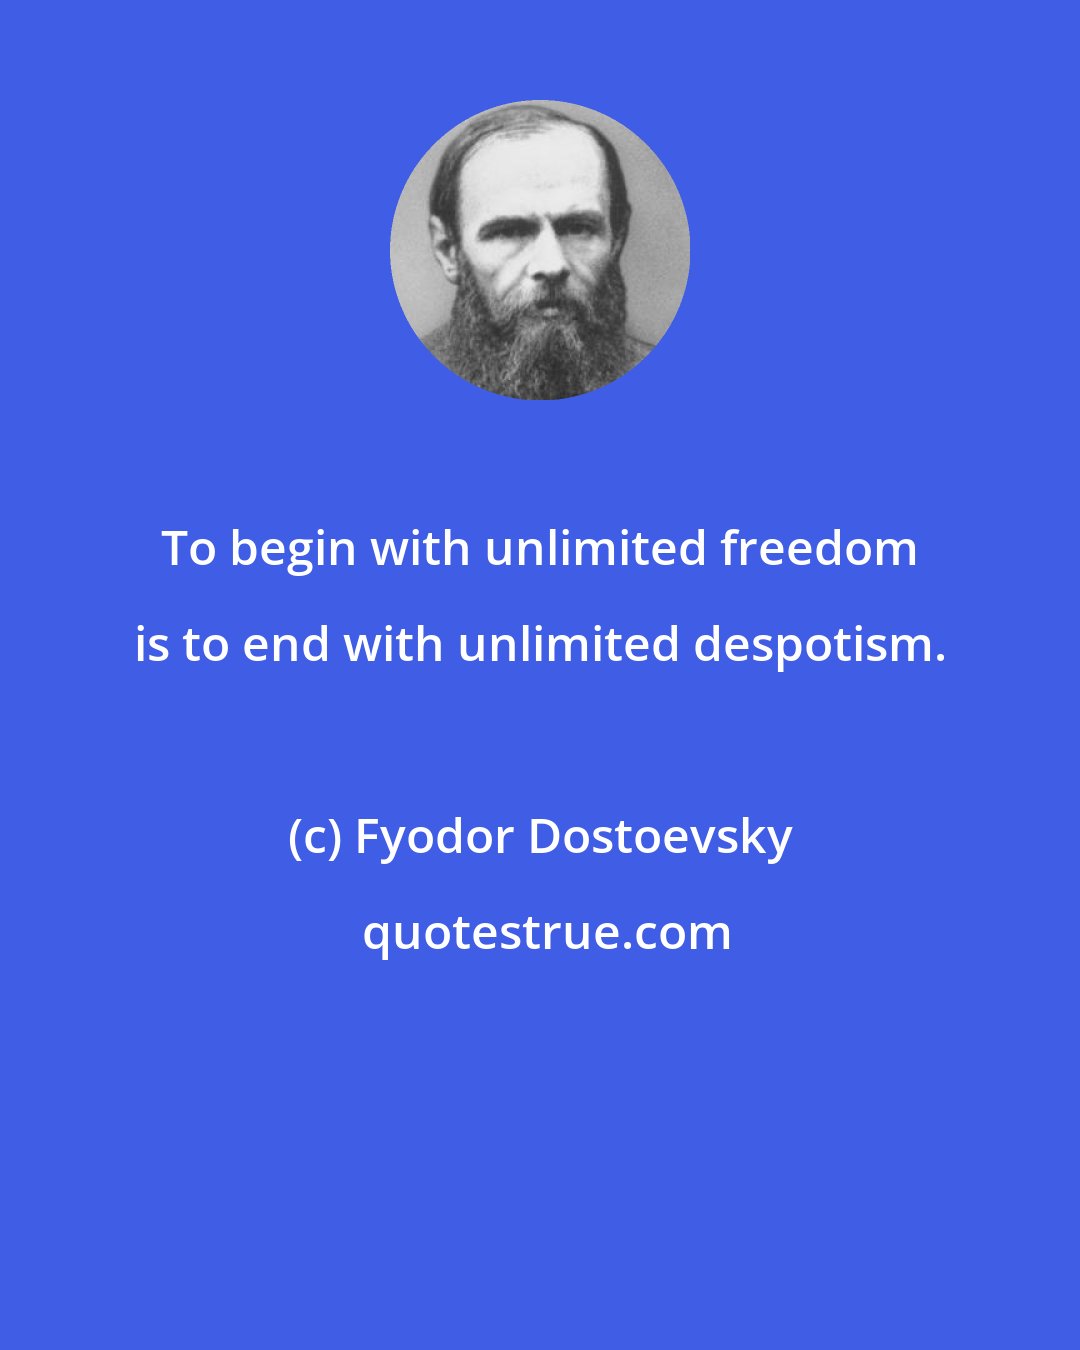 Fyodor Dostoevsky: To begin with unlimited freedom is to end with unlimited despotism.